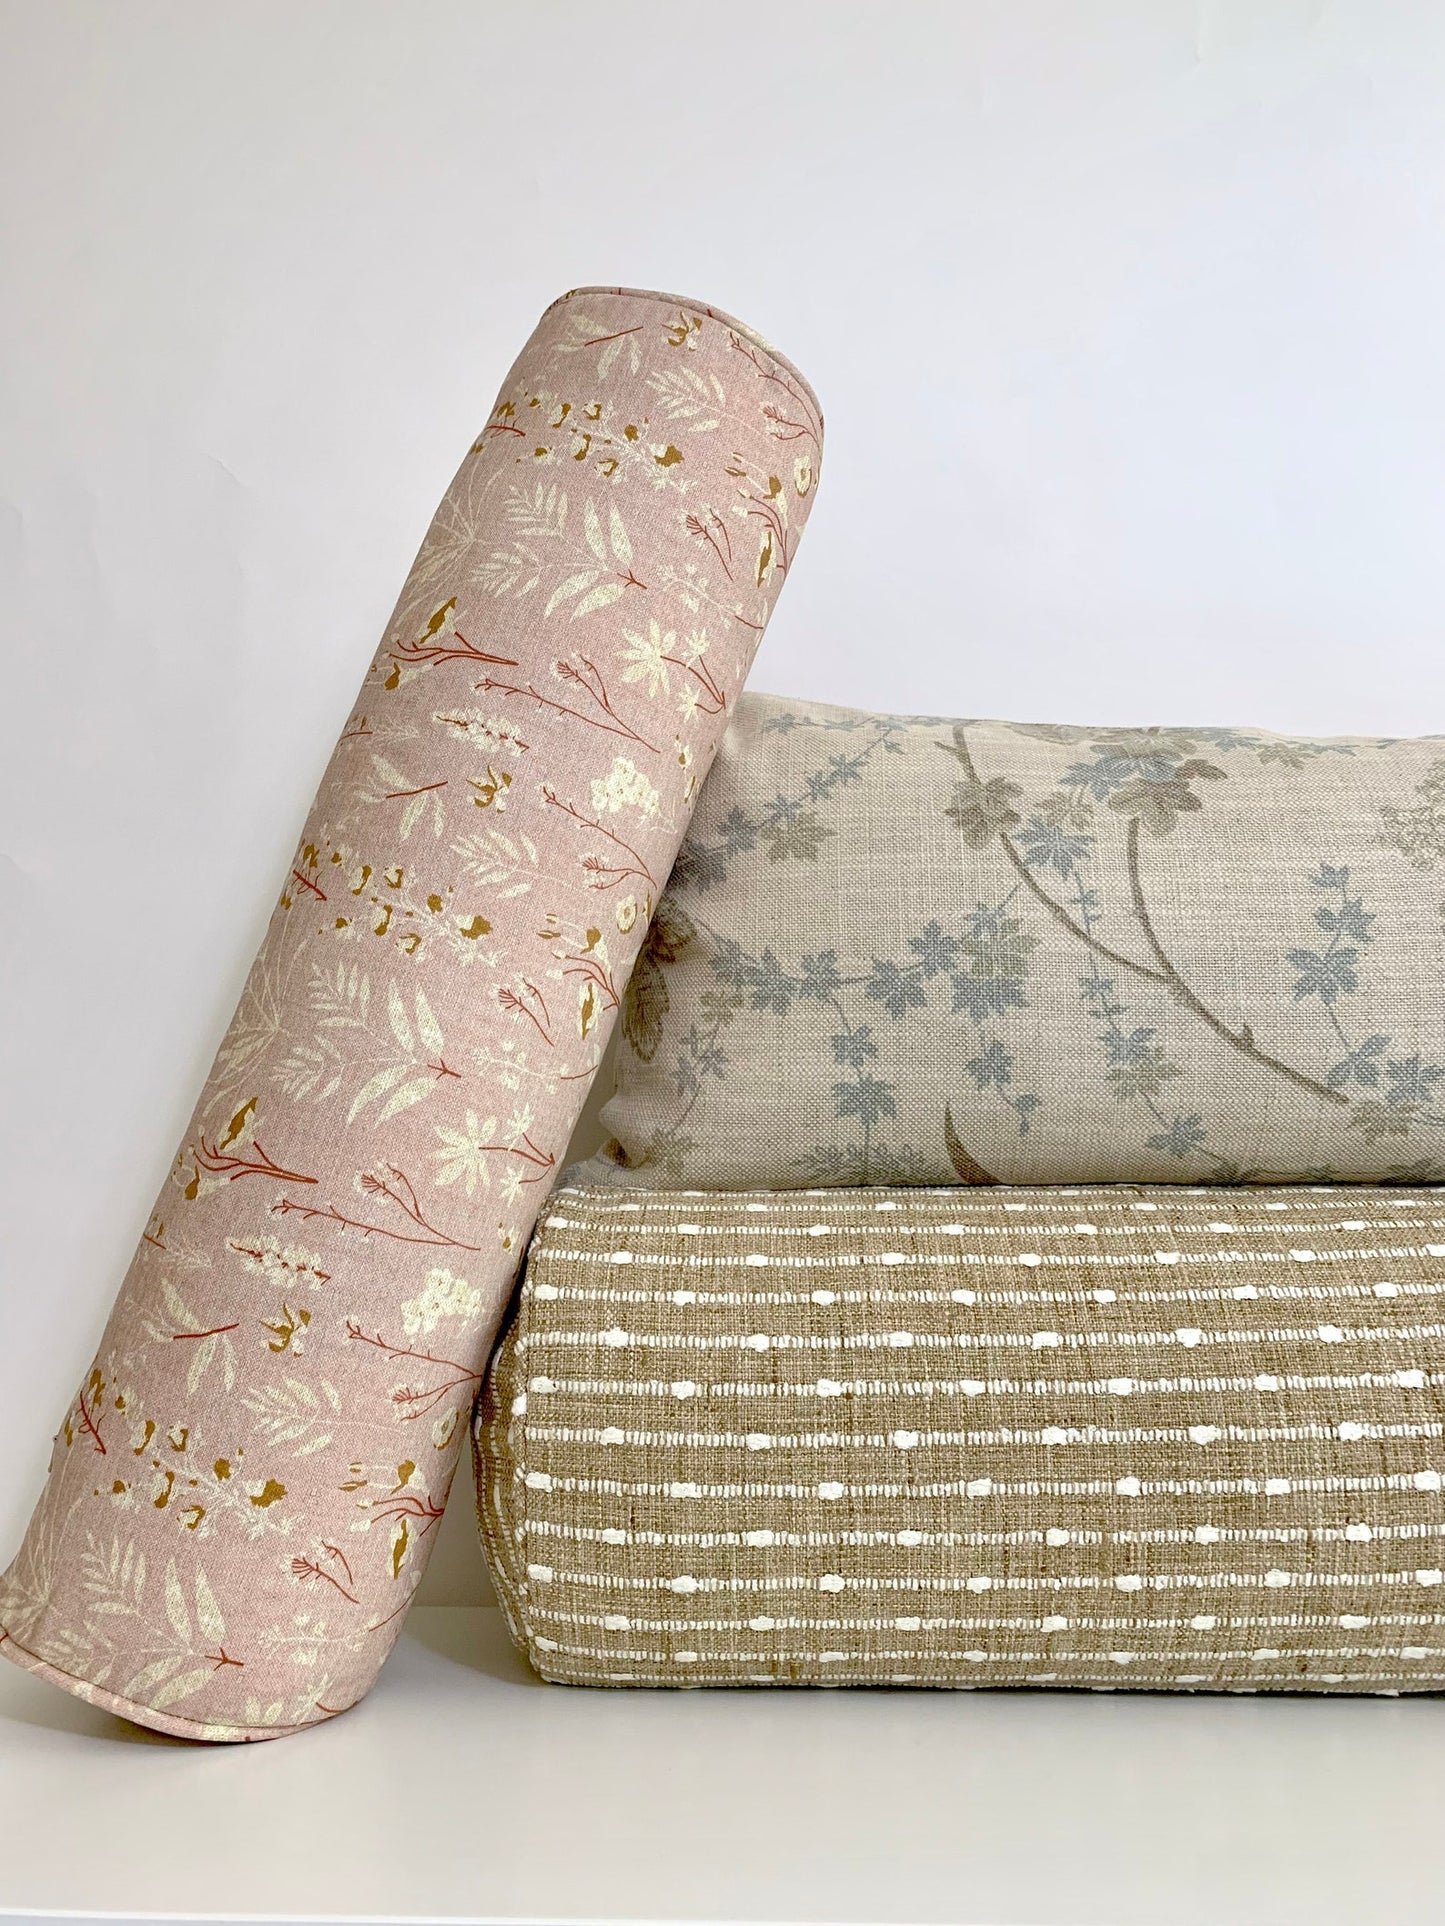 Wildflower Botanical Floral Print Pillow Cover in Blush Pink - Linen - Available in Bolster, Throw, Lumbar, Euro Sham